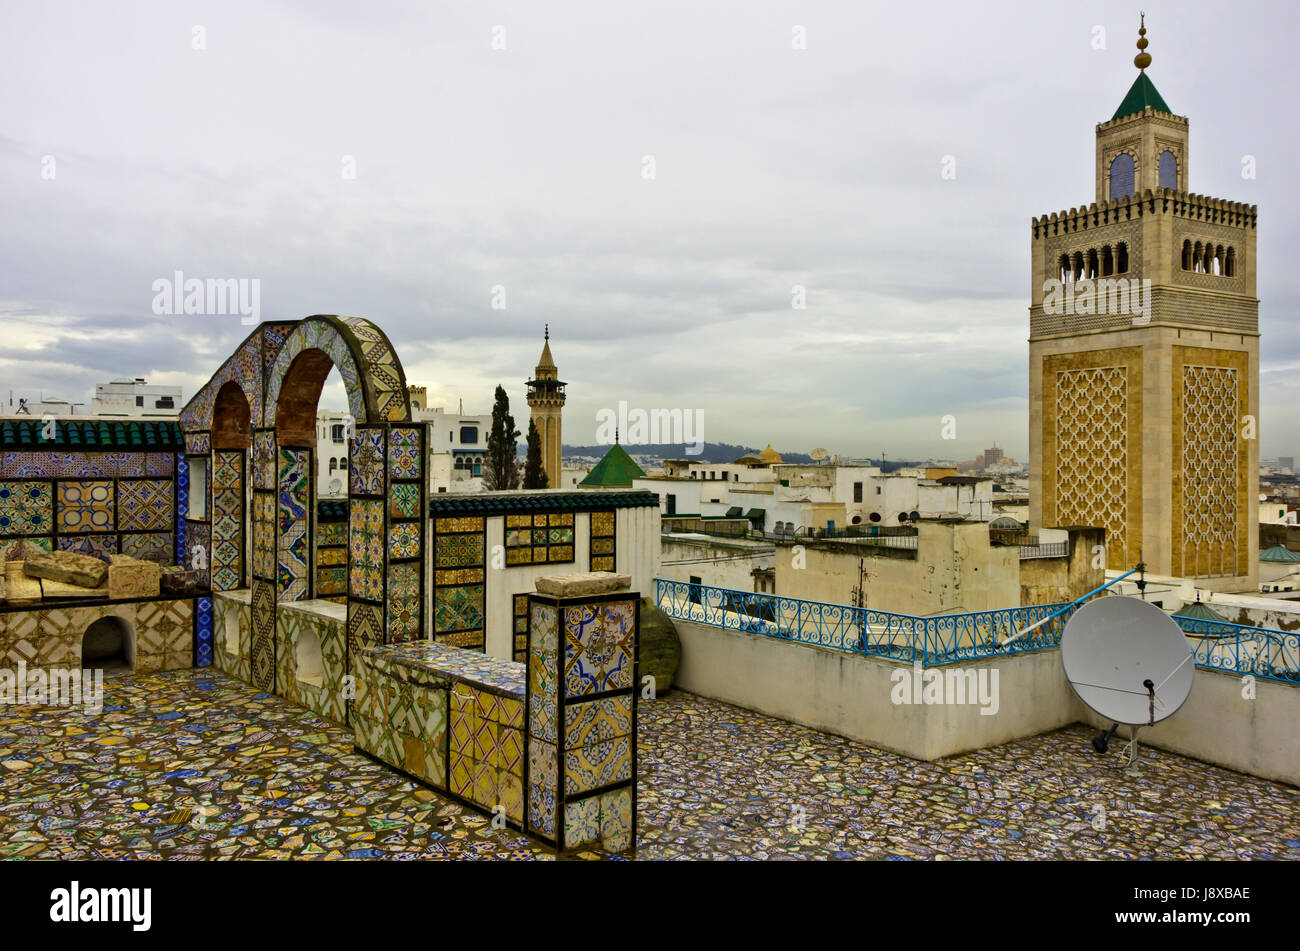 tower, tourism, africa, tunisia, ornaments, tower, houses, stone, tourism, Stock Photo